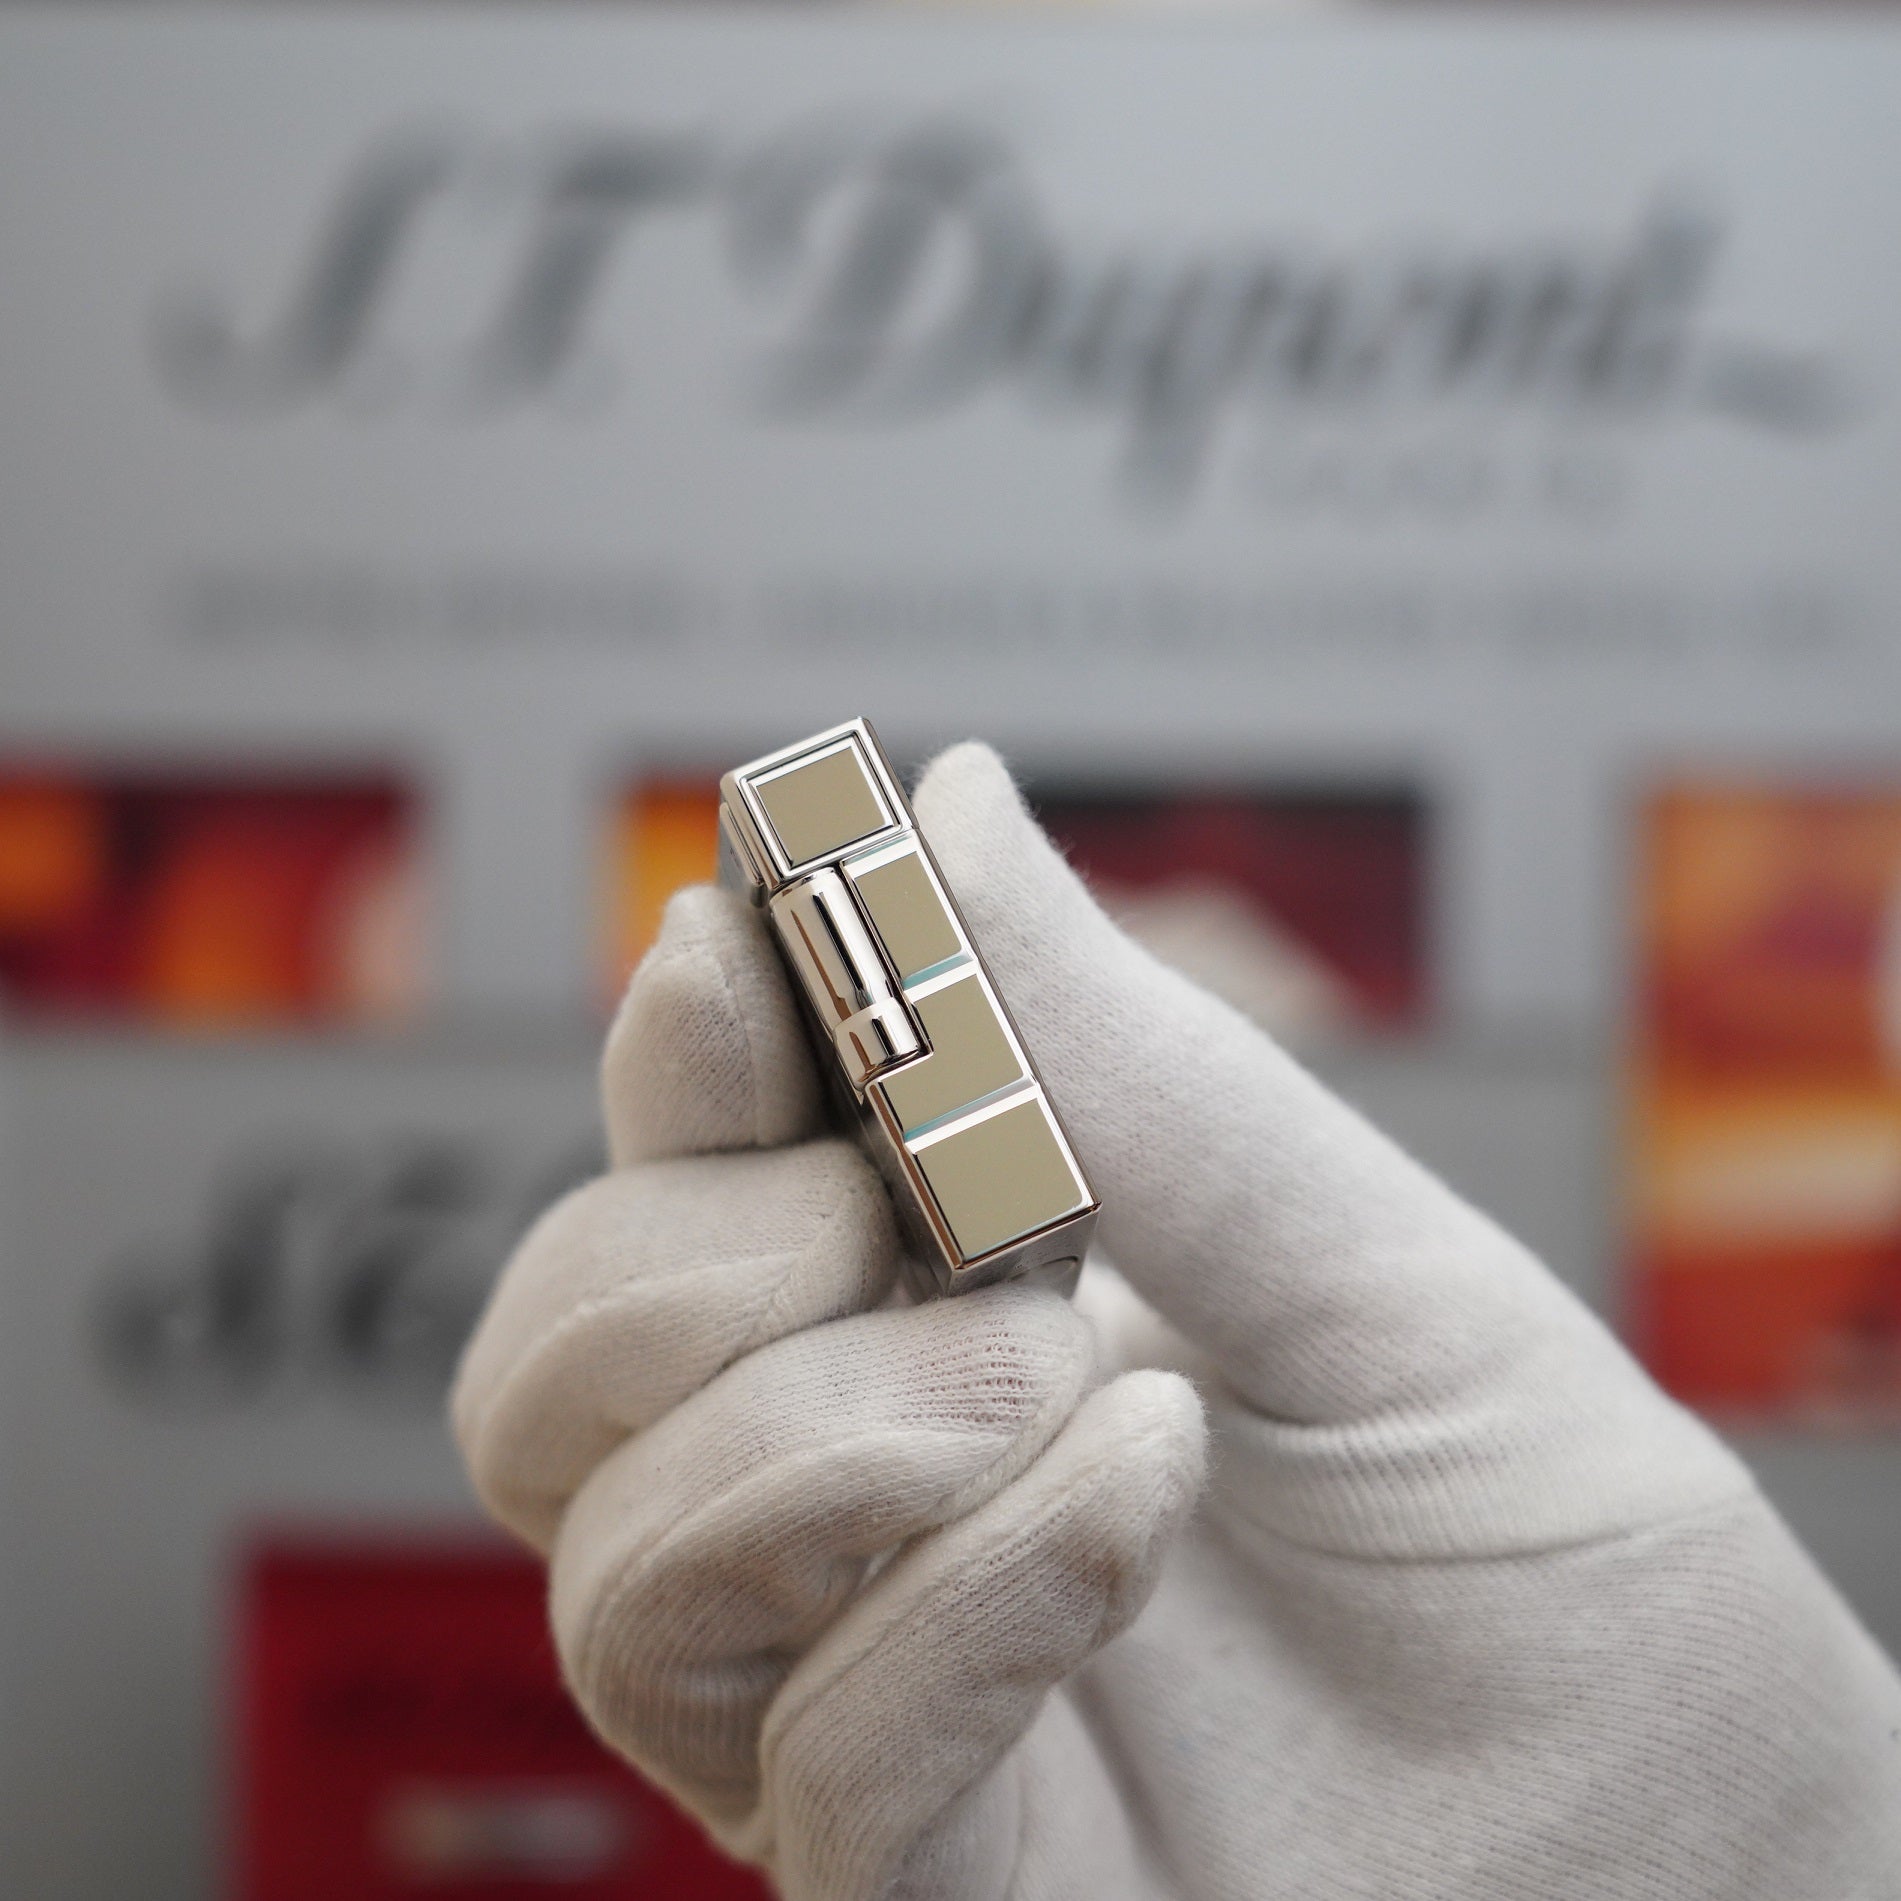 S.T. Dupont introduces the Vintage S.T. Dupont 1990 Limited anniversary Platinum Serie 60 years 1 Diamond Ligne 1 Plated Lighter, a vintage lighter from the Ligne 1 collection.